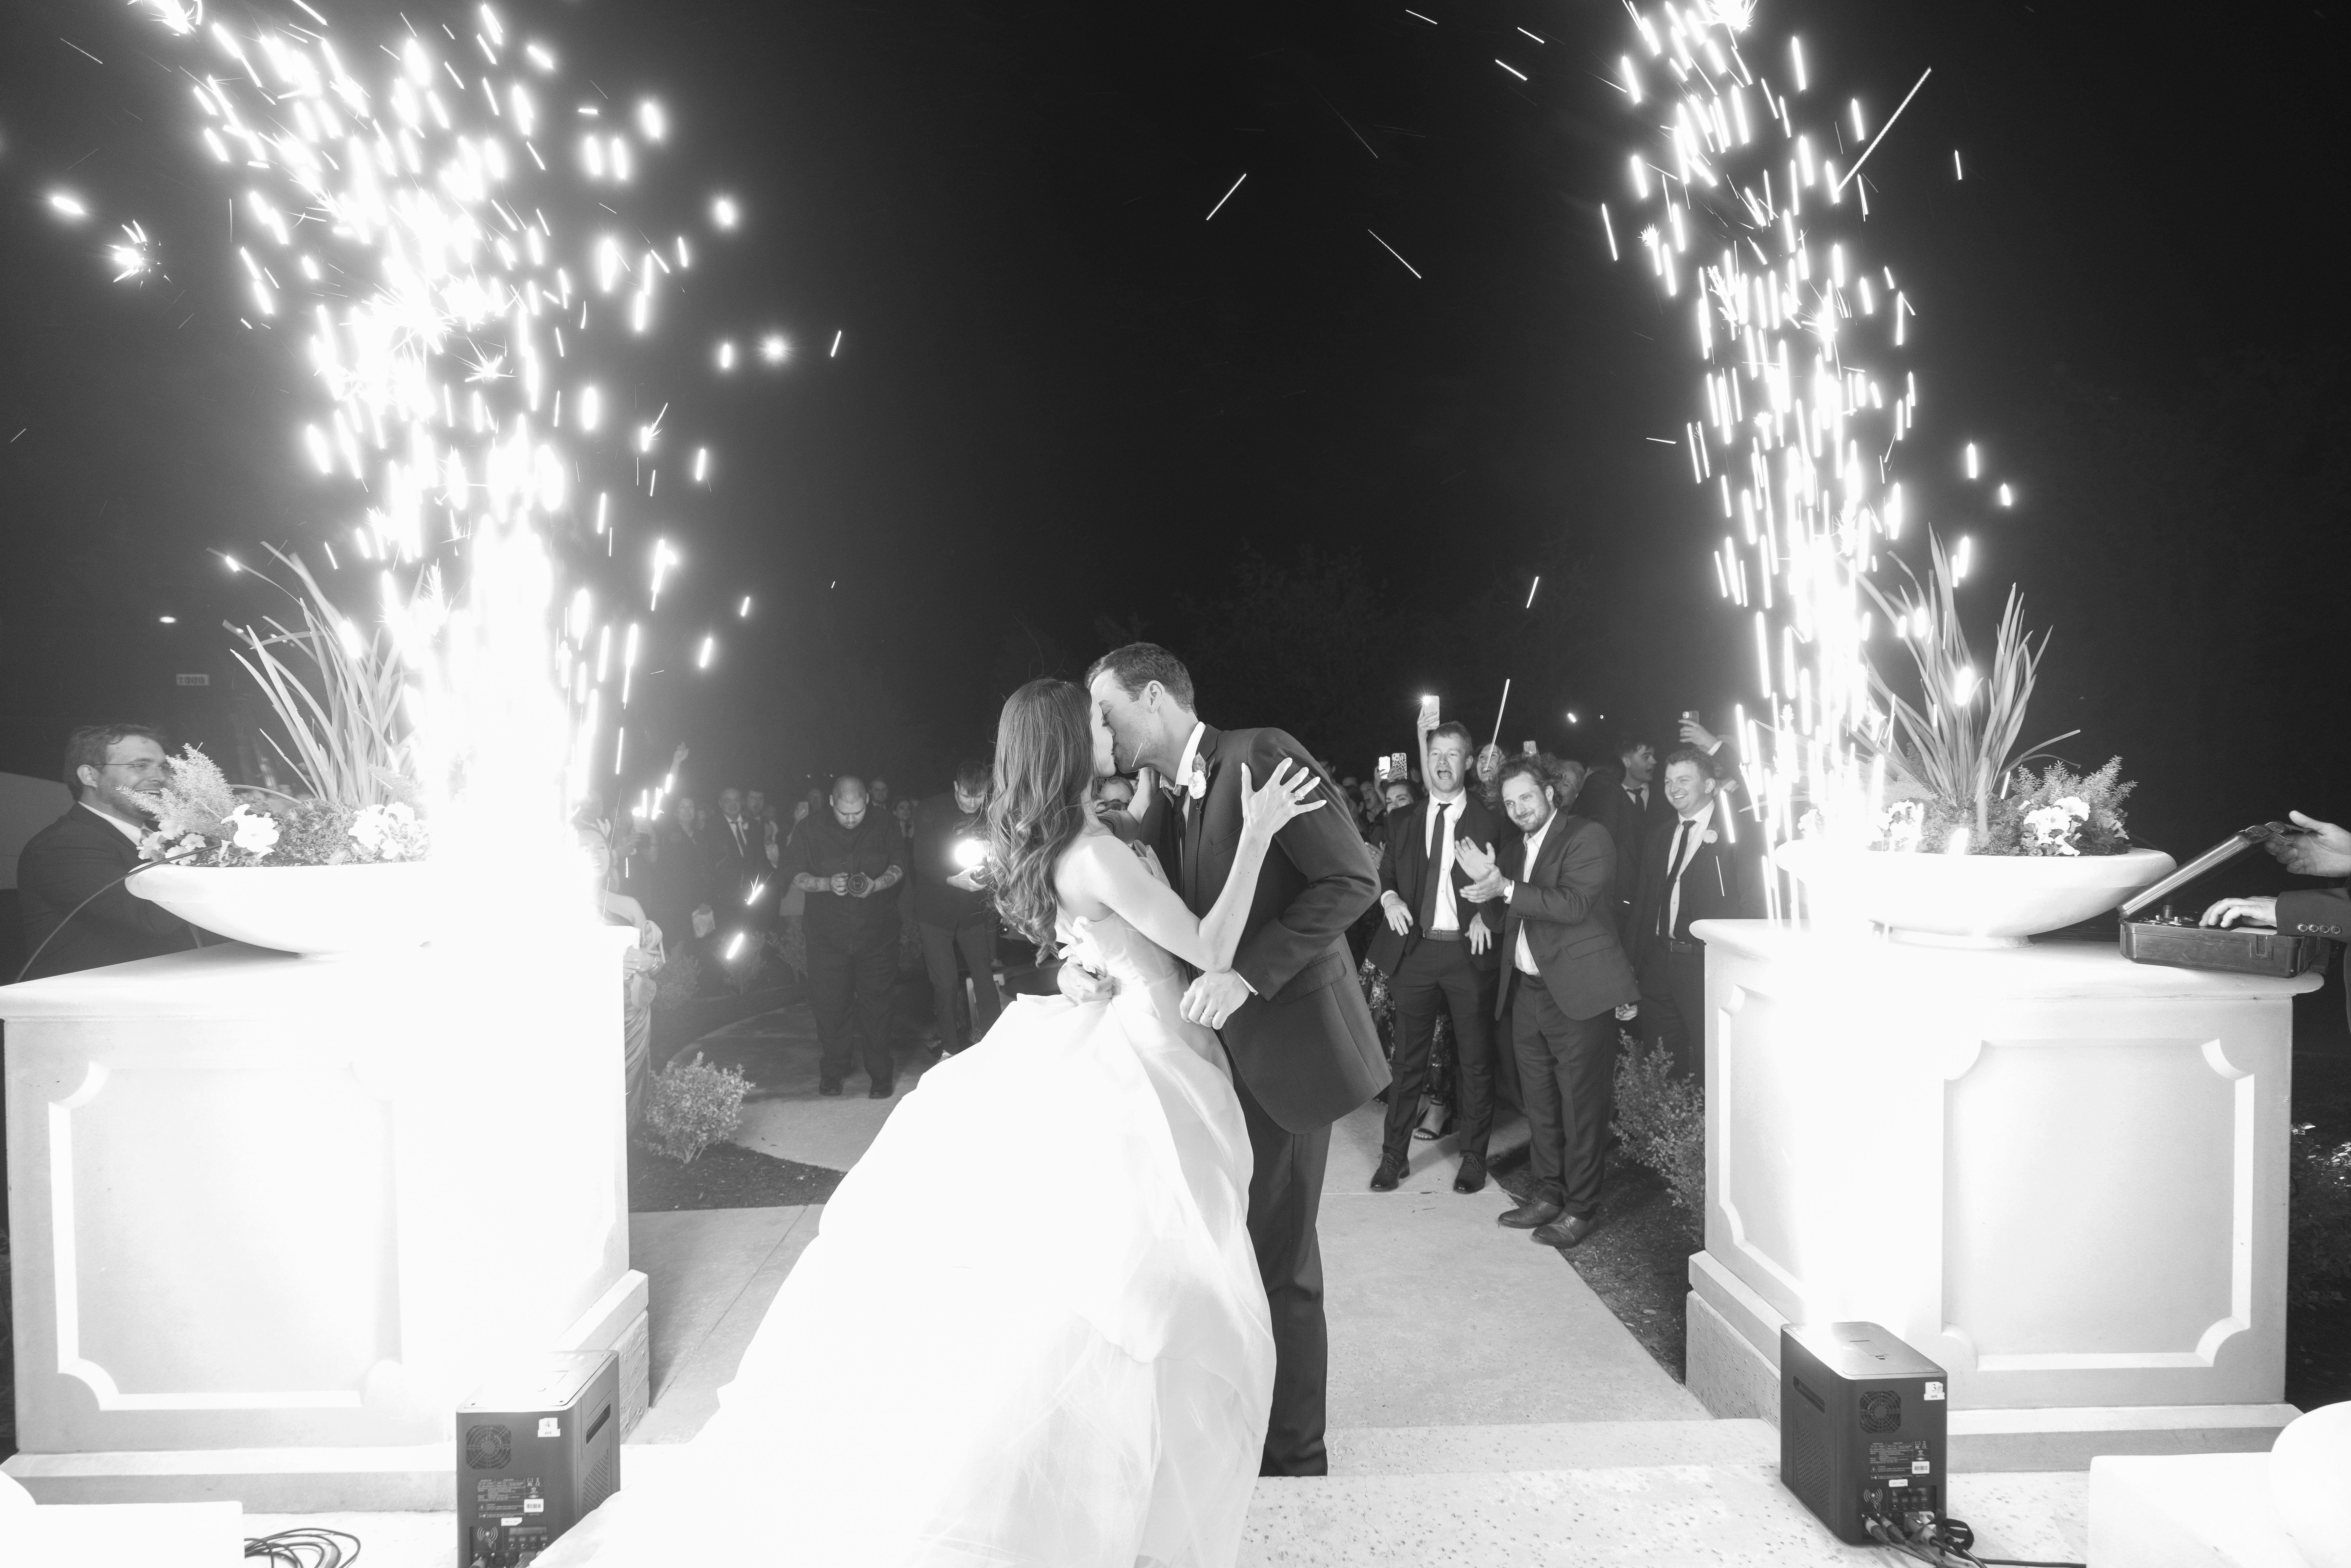 Best wedding getaway featuring a bride and groom exiting with cold sparks